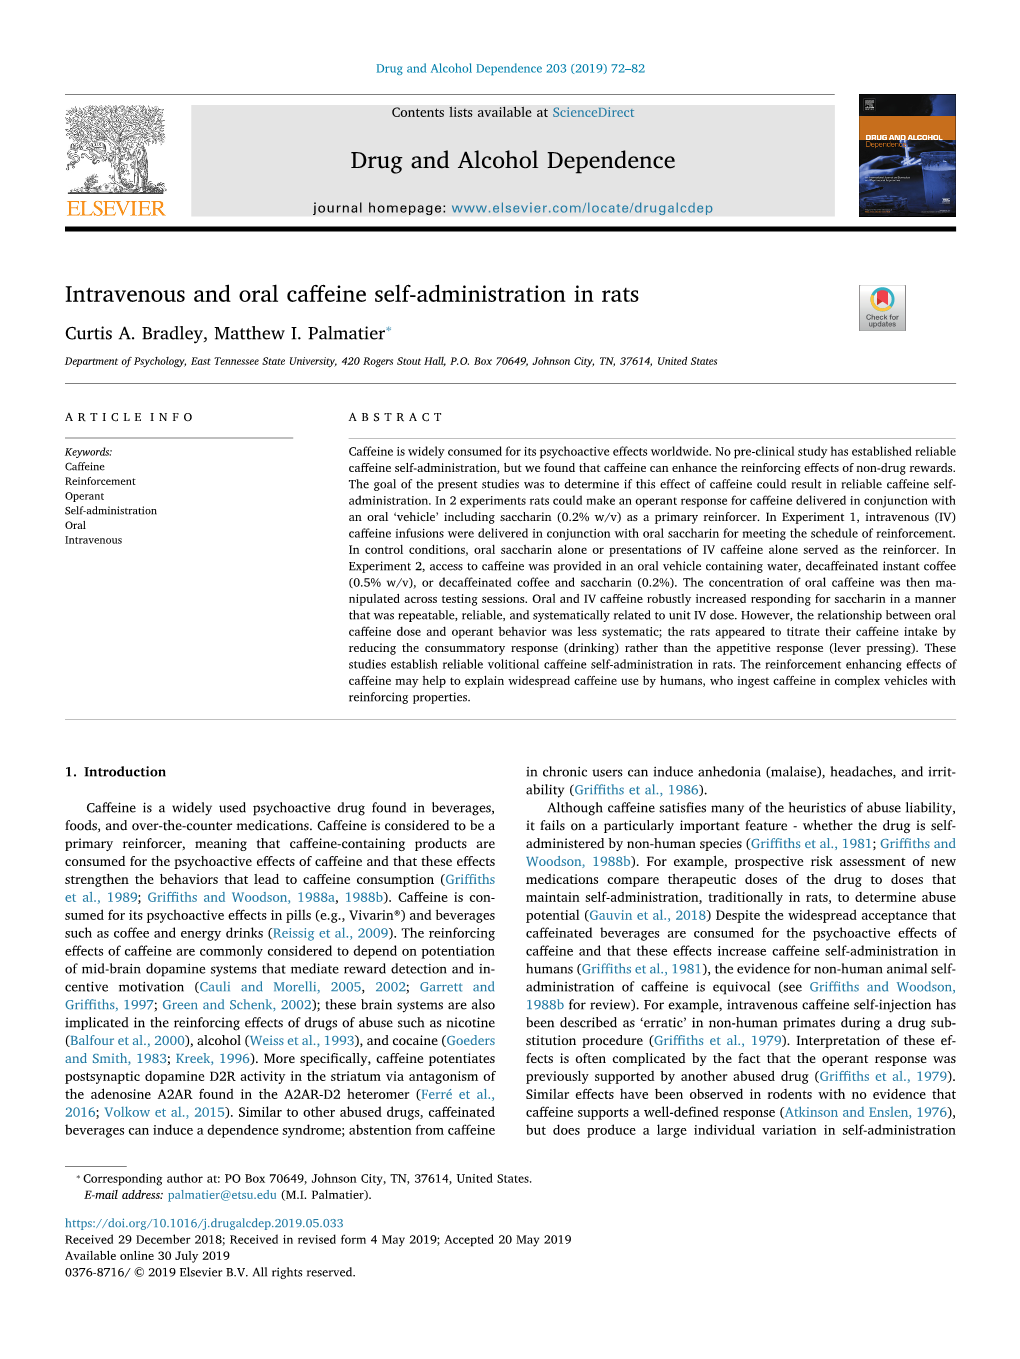 Intravenous and Oral Caffeine Self-Administration in Rats